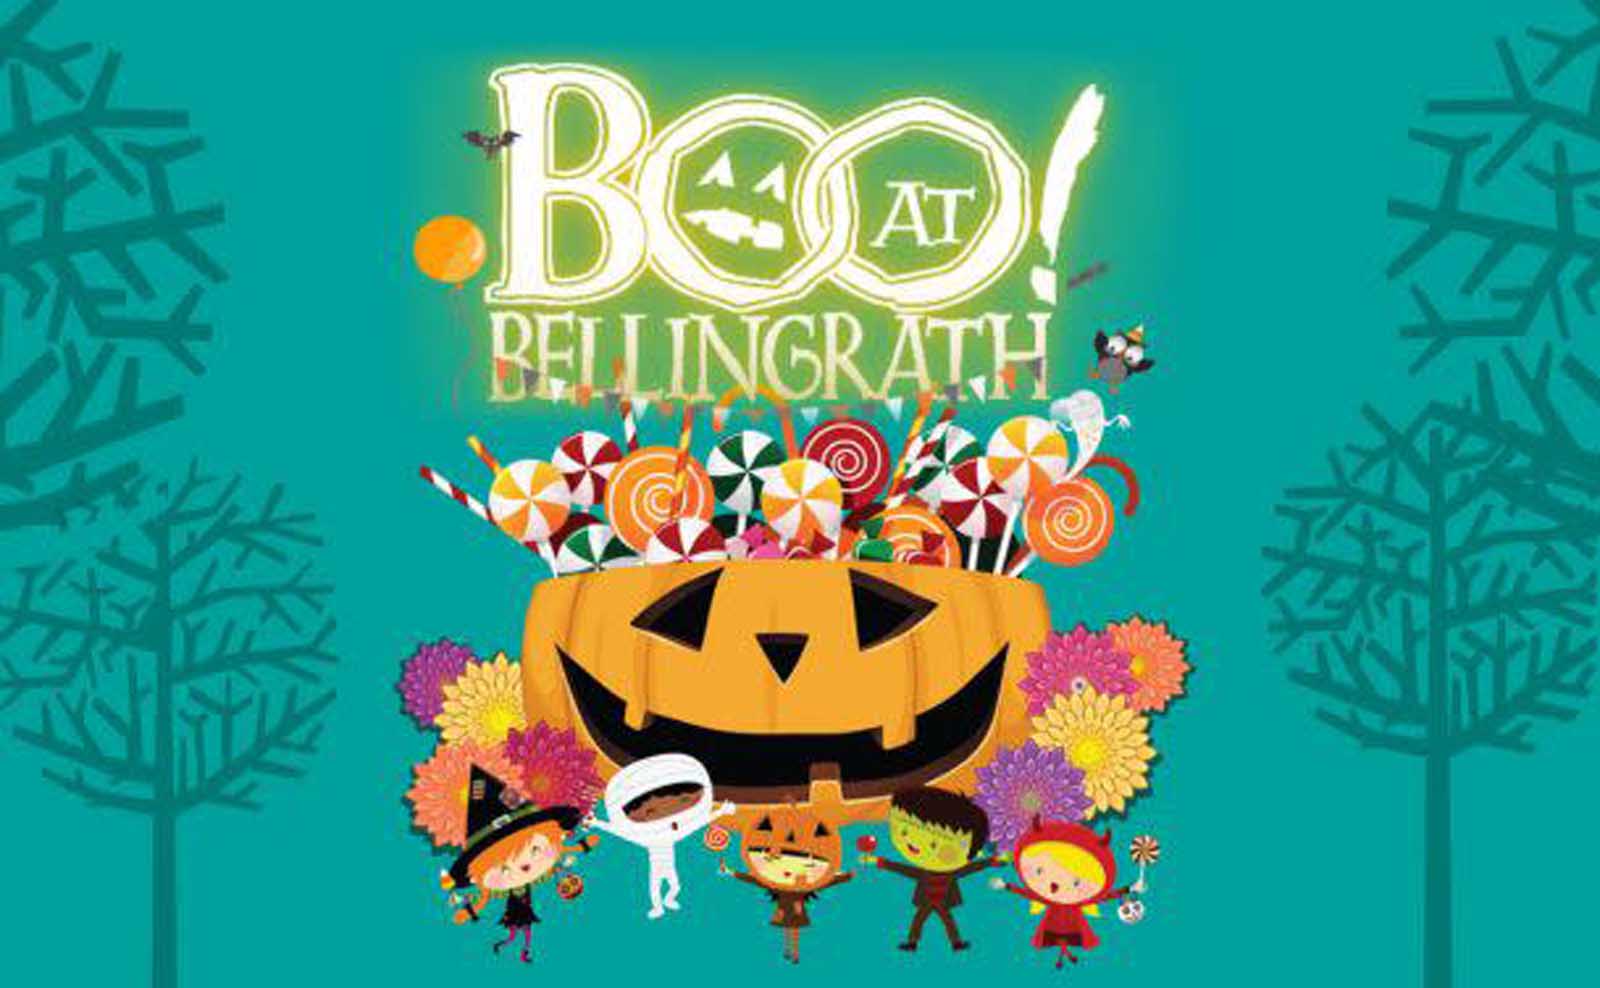 Boo At Bellingrath Coming Up